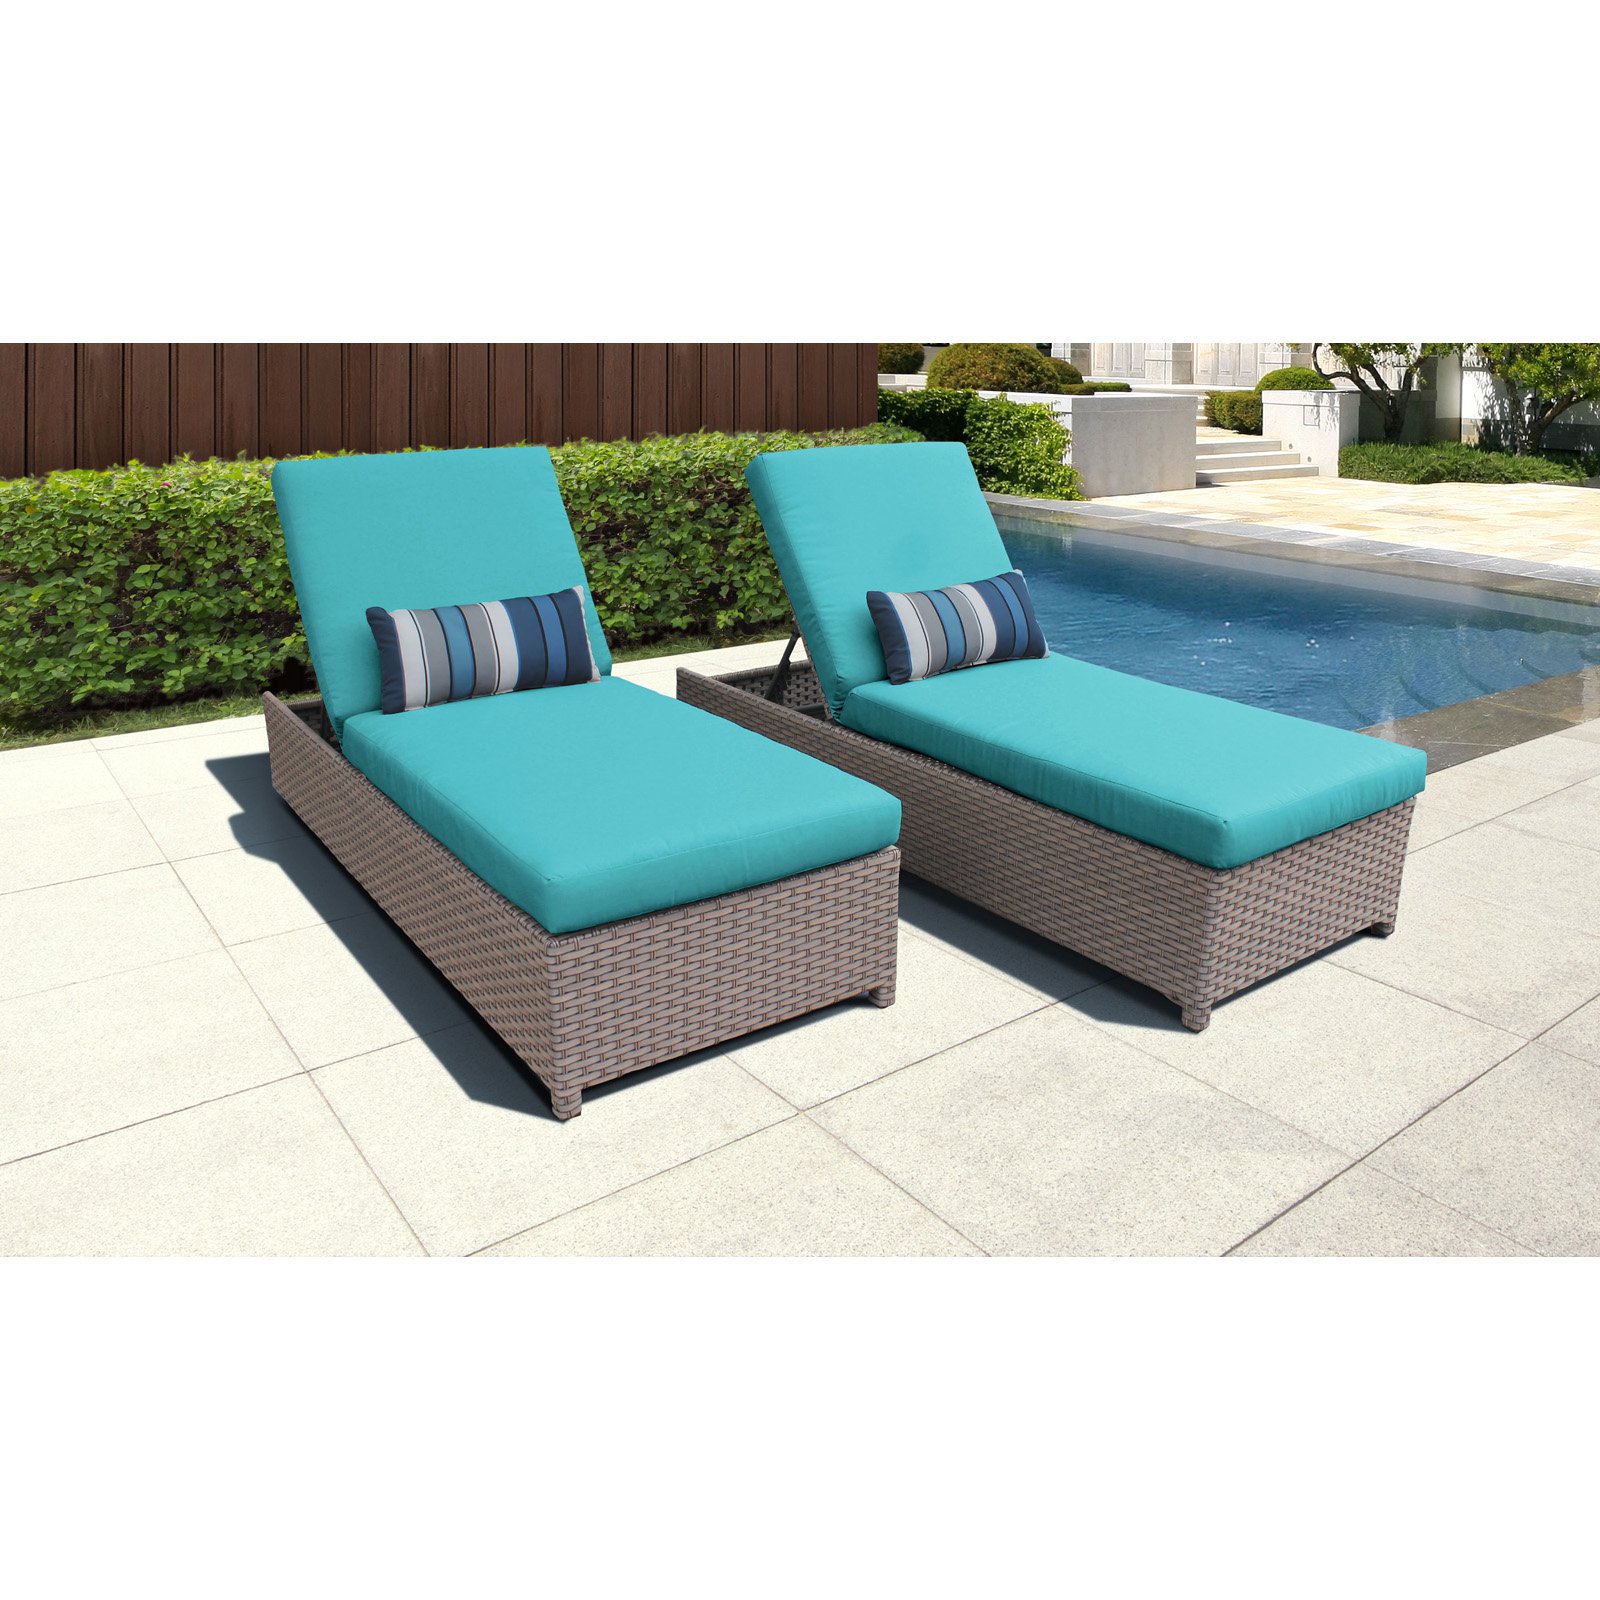 TK Classics Florence Wheeled Wicker Outdoor Chaise Lounge Chair - Set of 2 - image 5 of 11